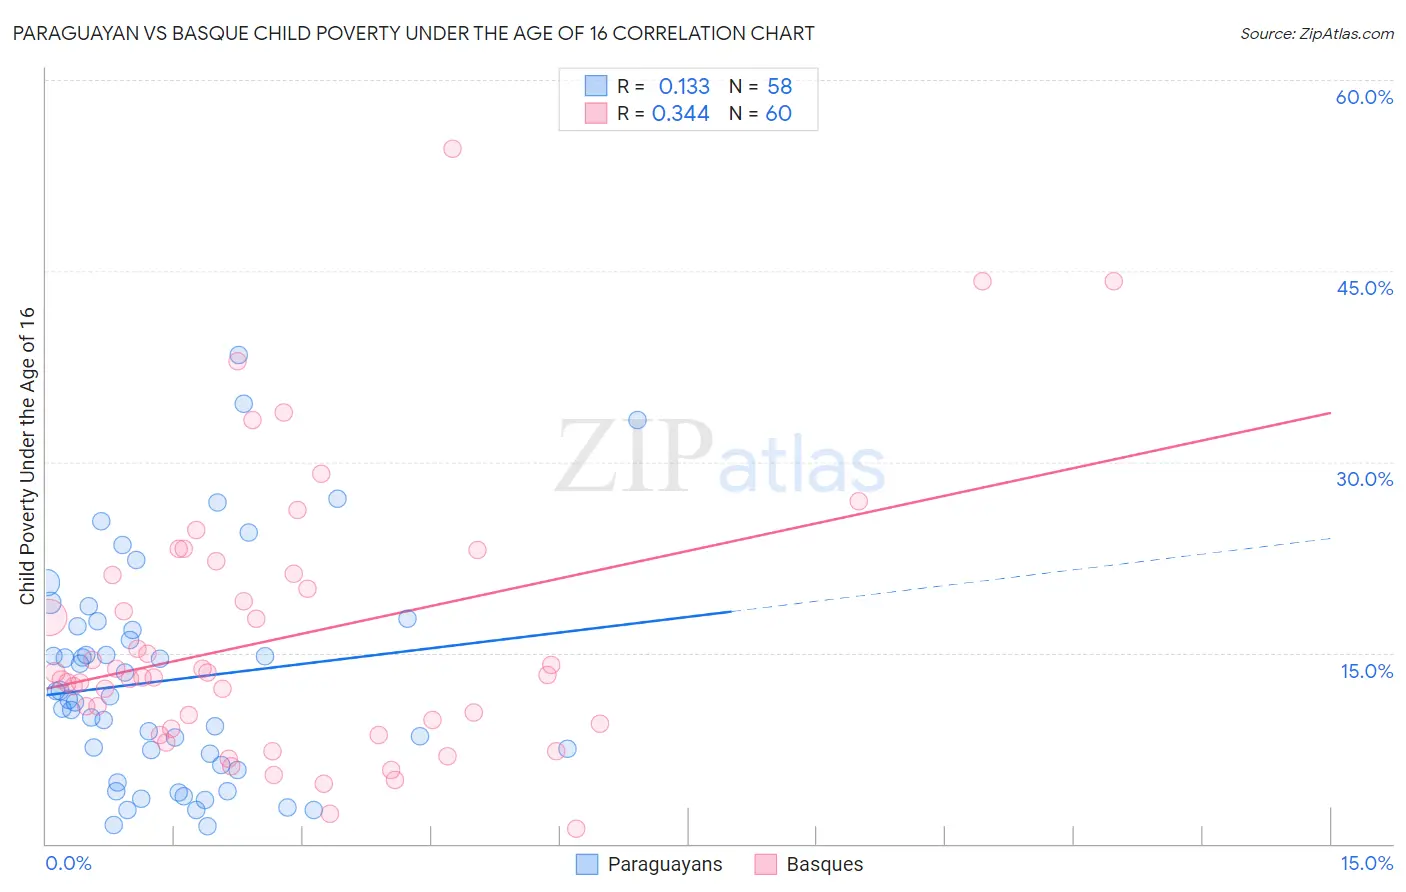 Paraguayan vs Basque Child Poverty Under the Age of 16